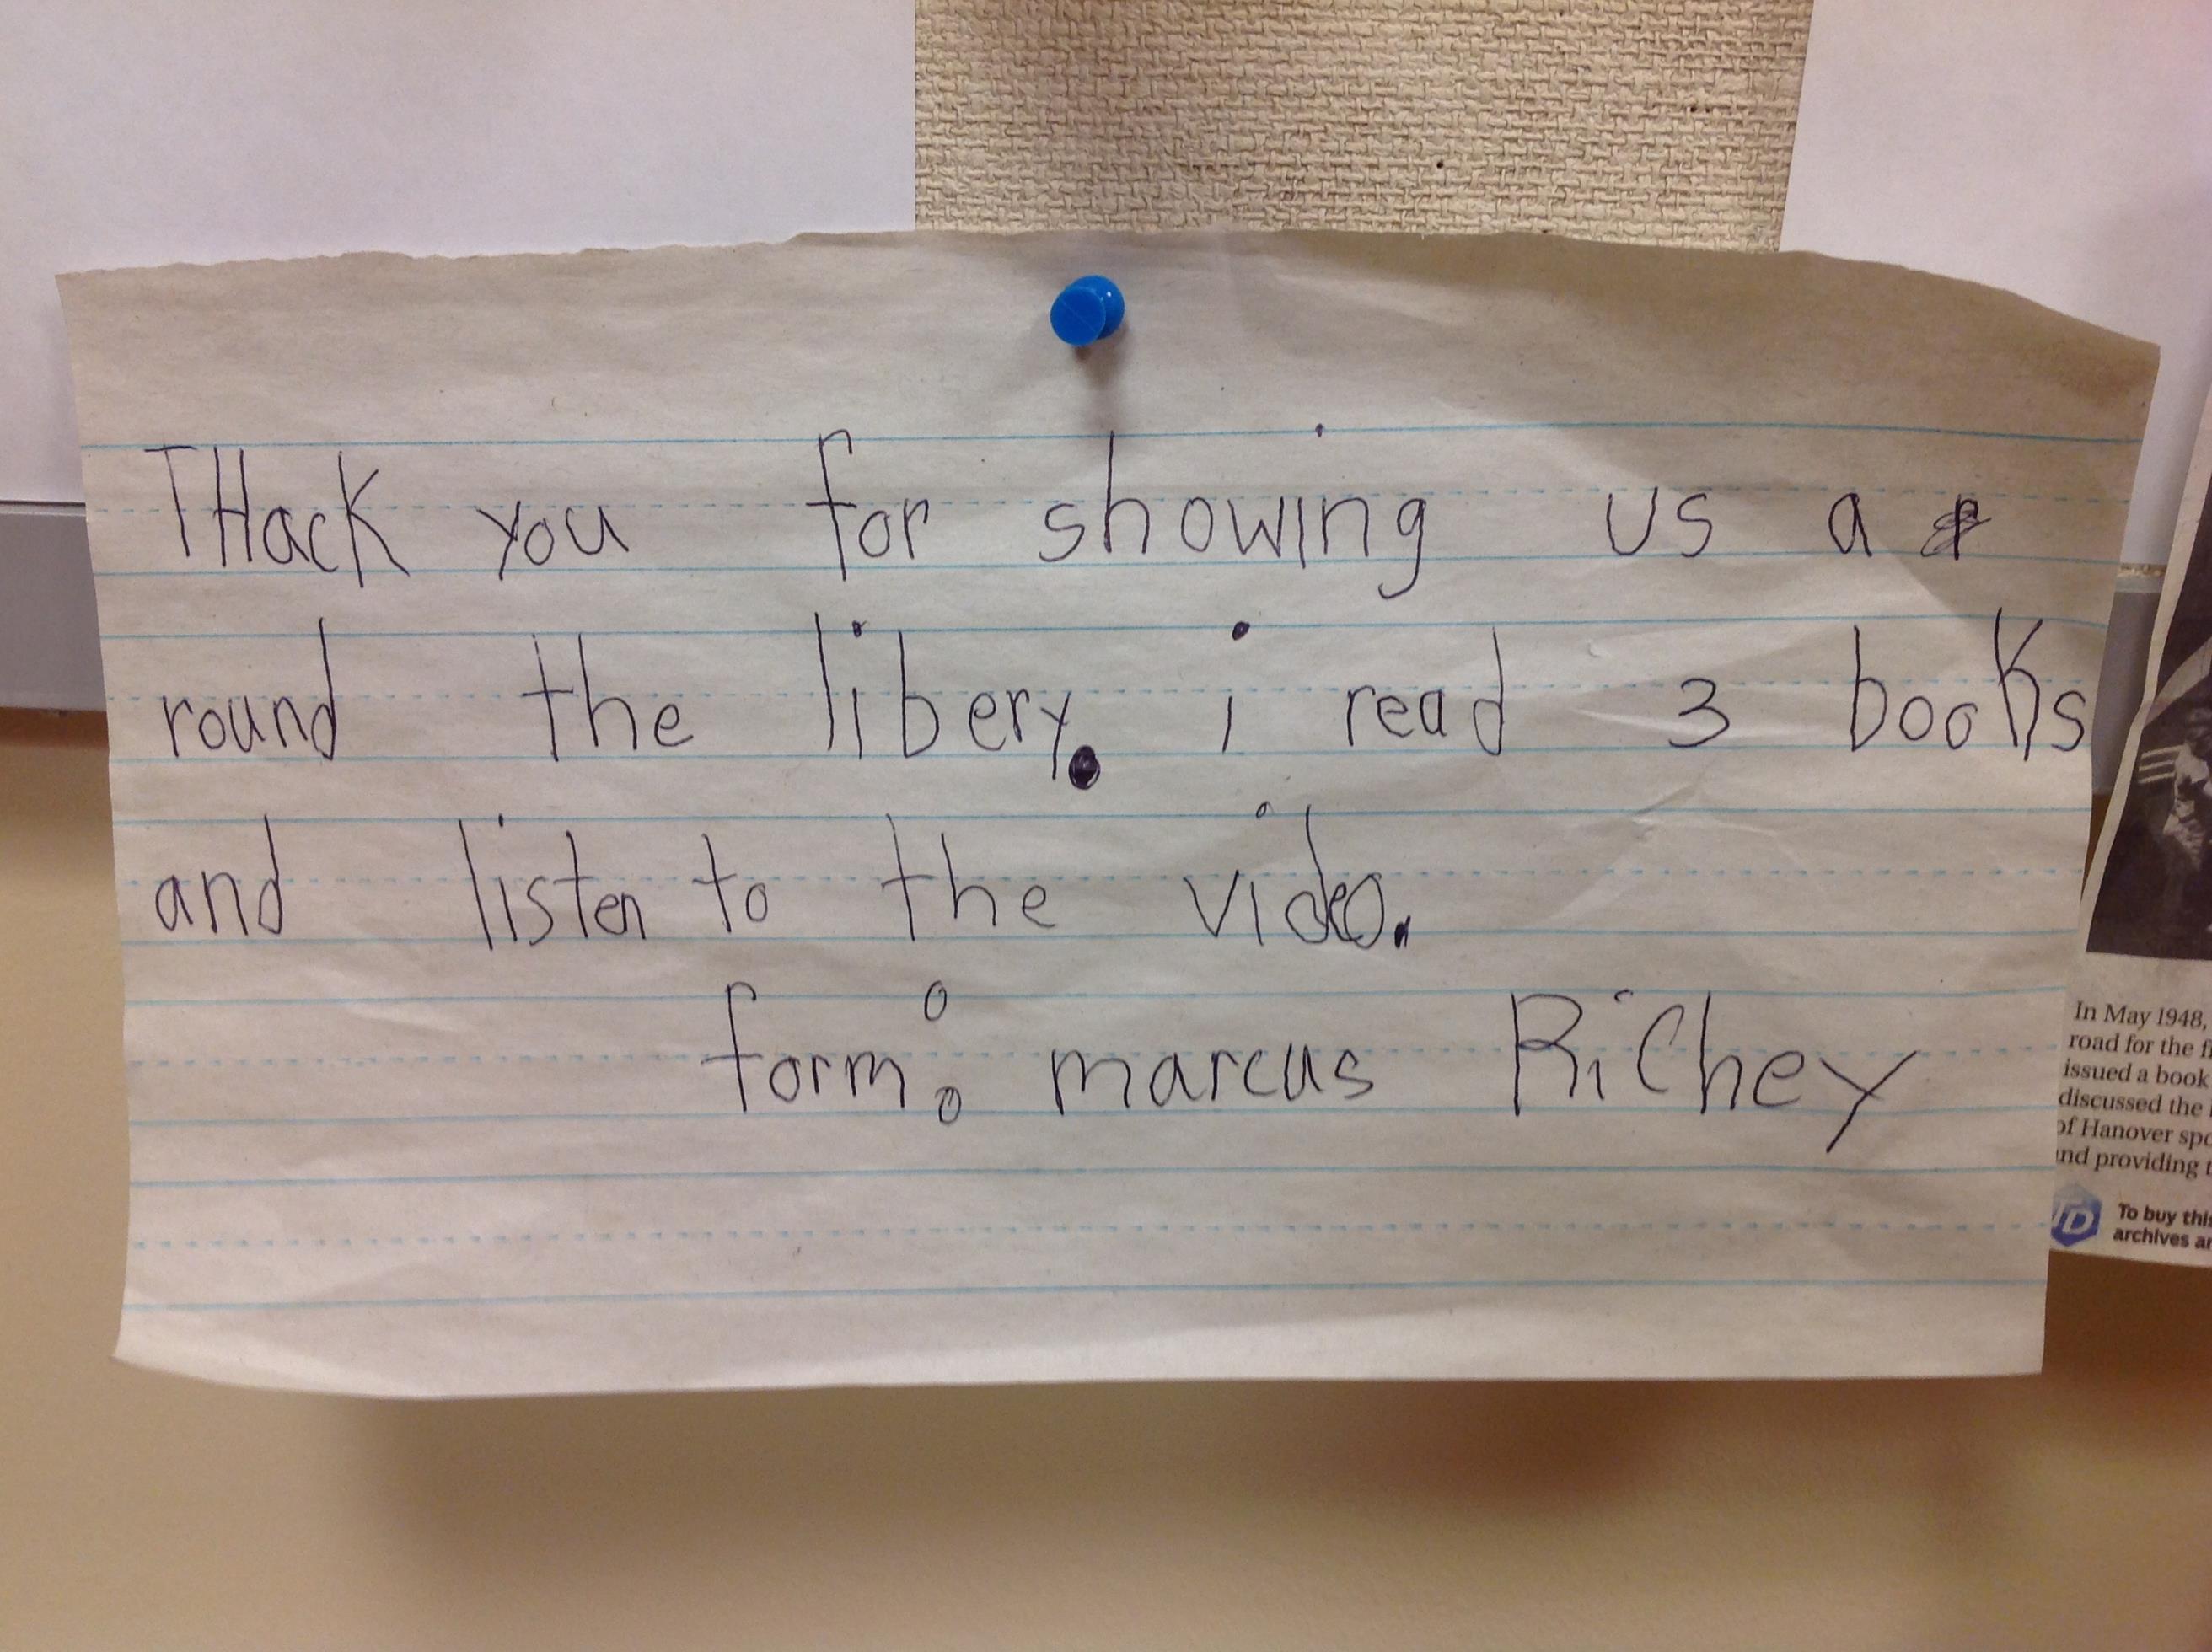 Marcus Richey, age 7, one of Mechanicsville’s young patrons submitted a note showing his love for the library. 